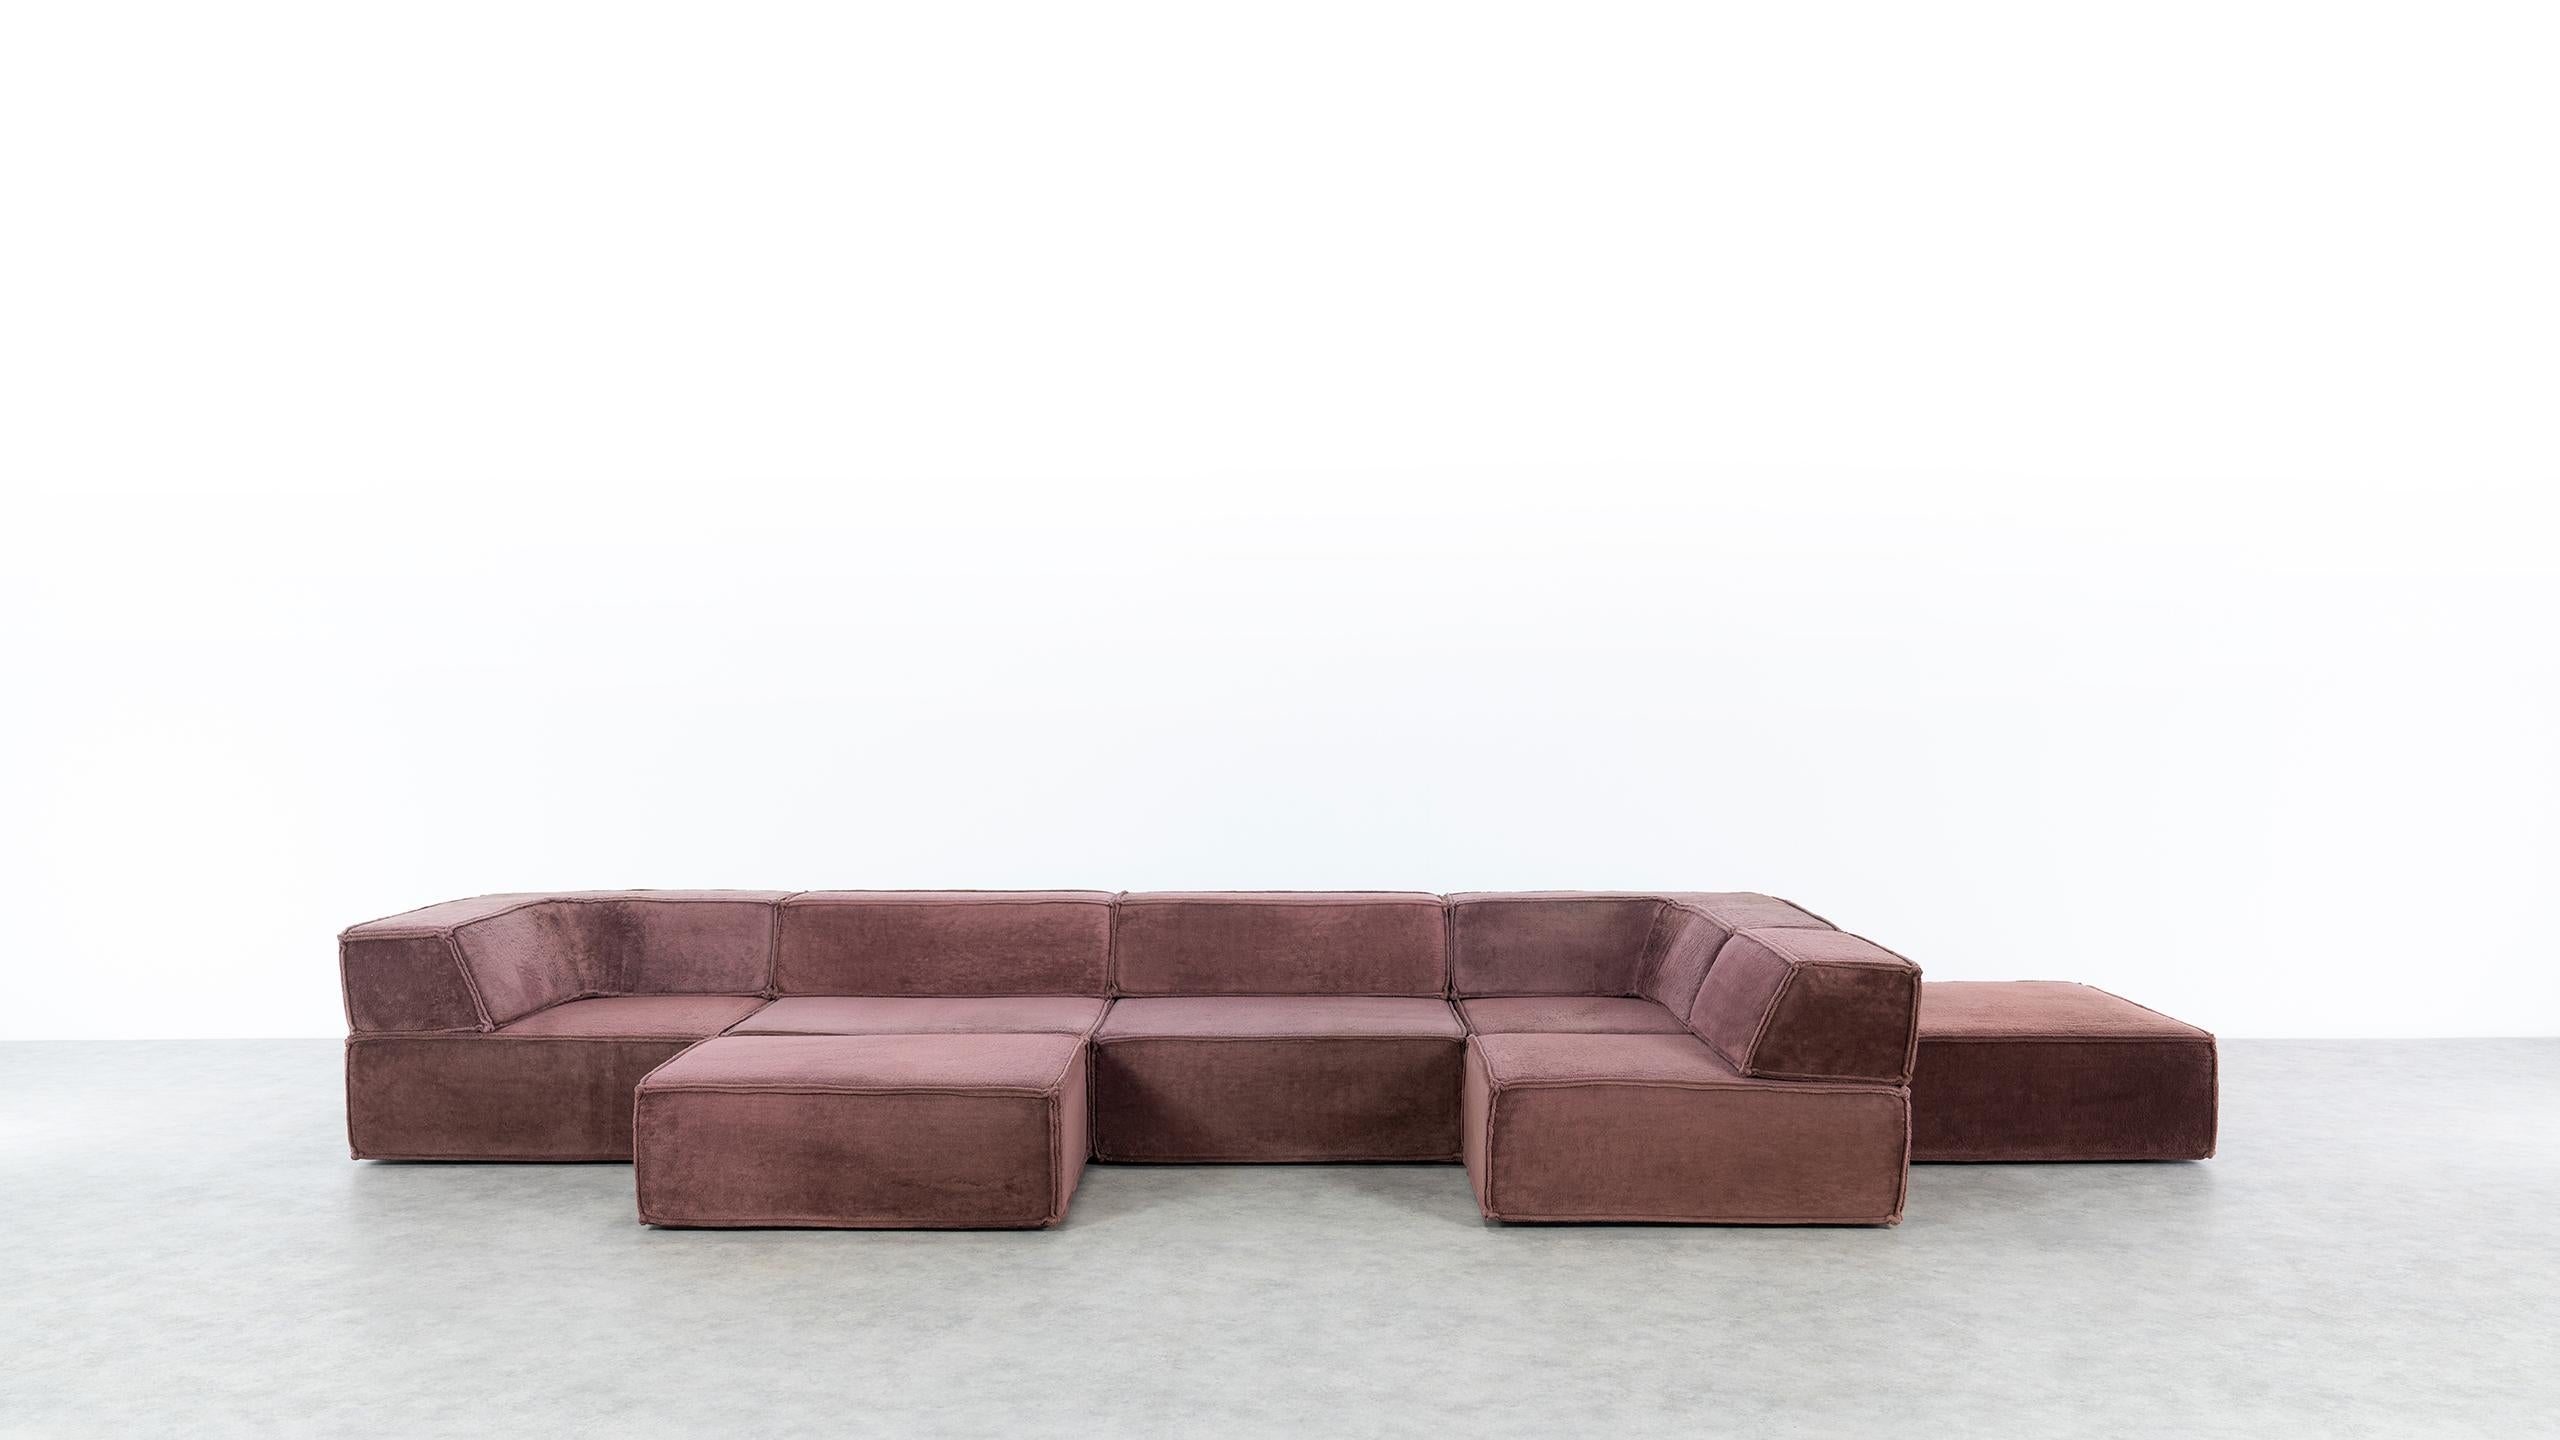 COR Trio Modular Sofa, Giant Landscape in Brown, 1972 by Team Form AG, Swiss 6